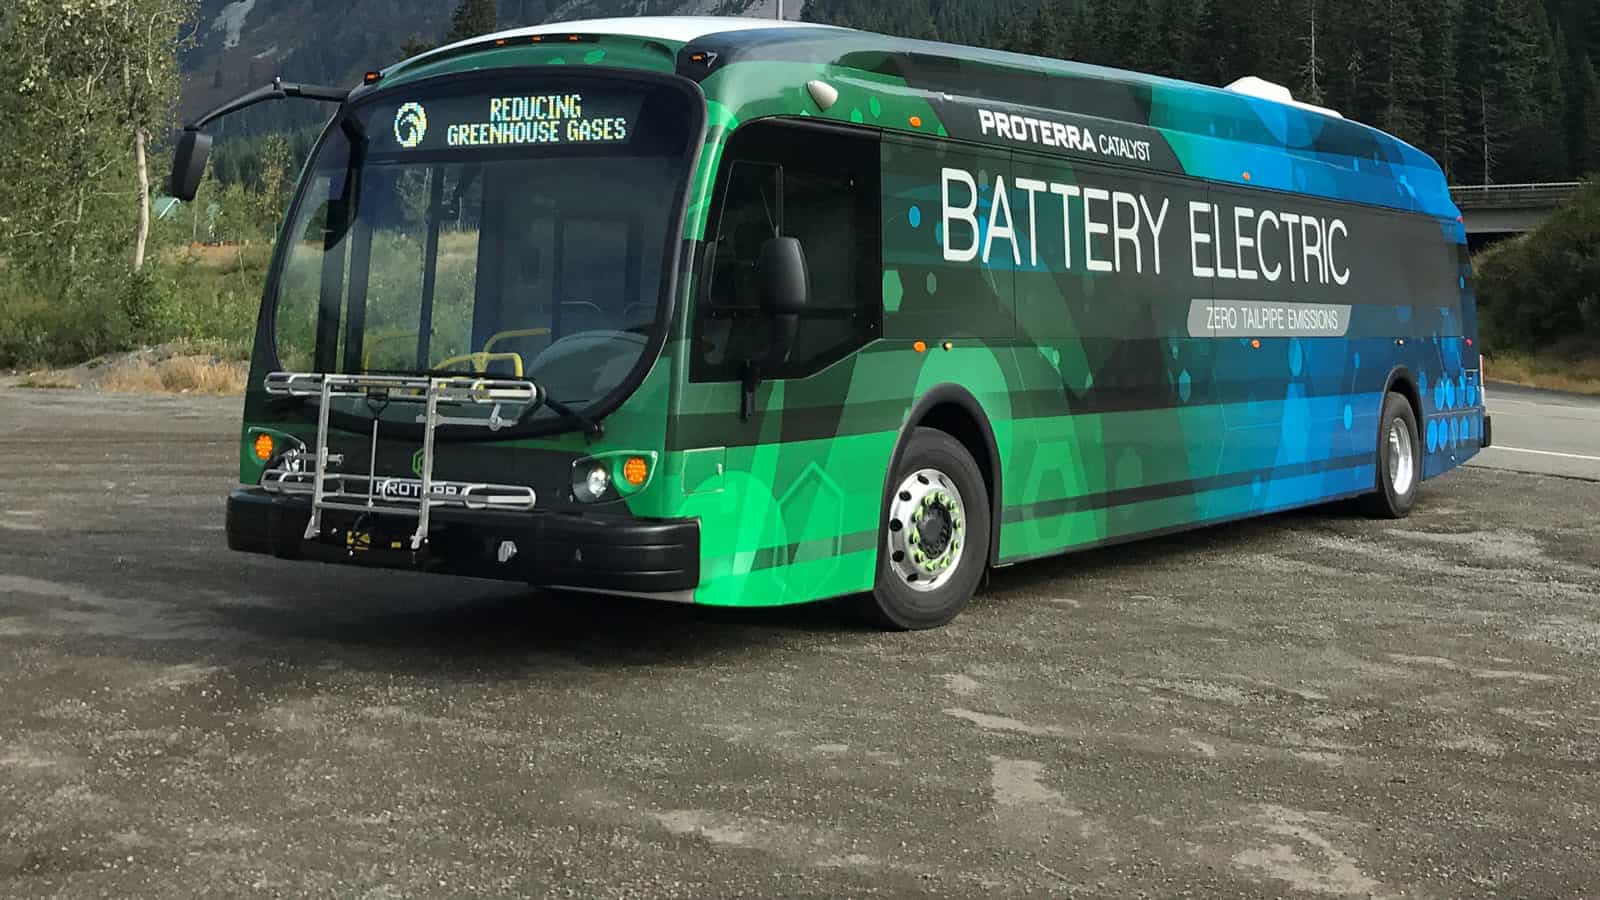 Zero-emission transit buses Battery-electric buses Fuel cell electric buses Public transportation Sustainable mobility